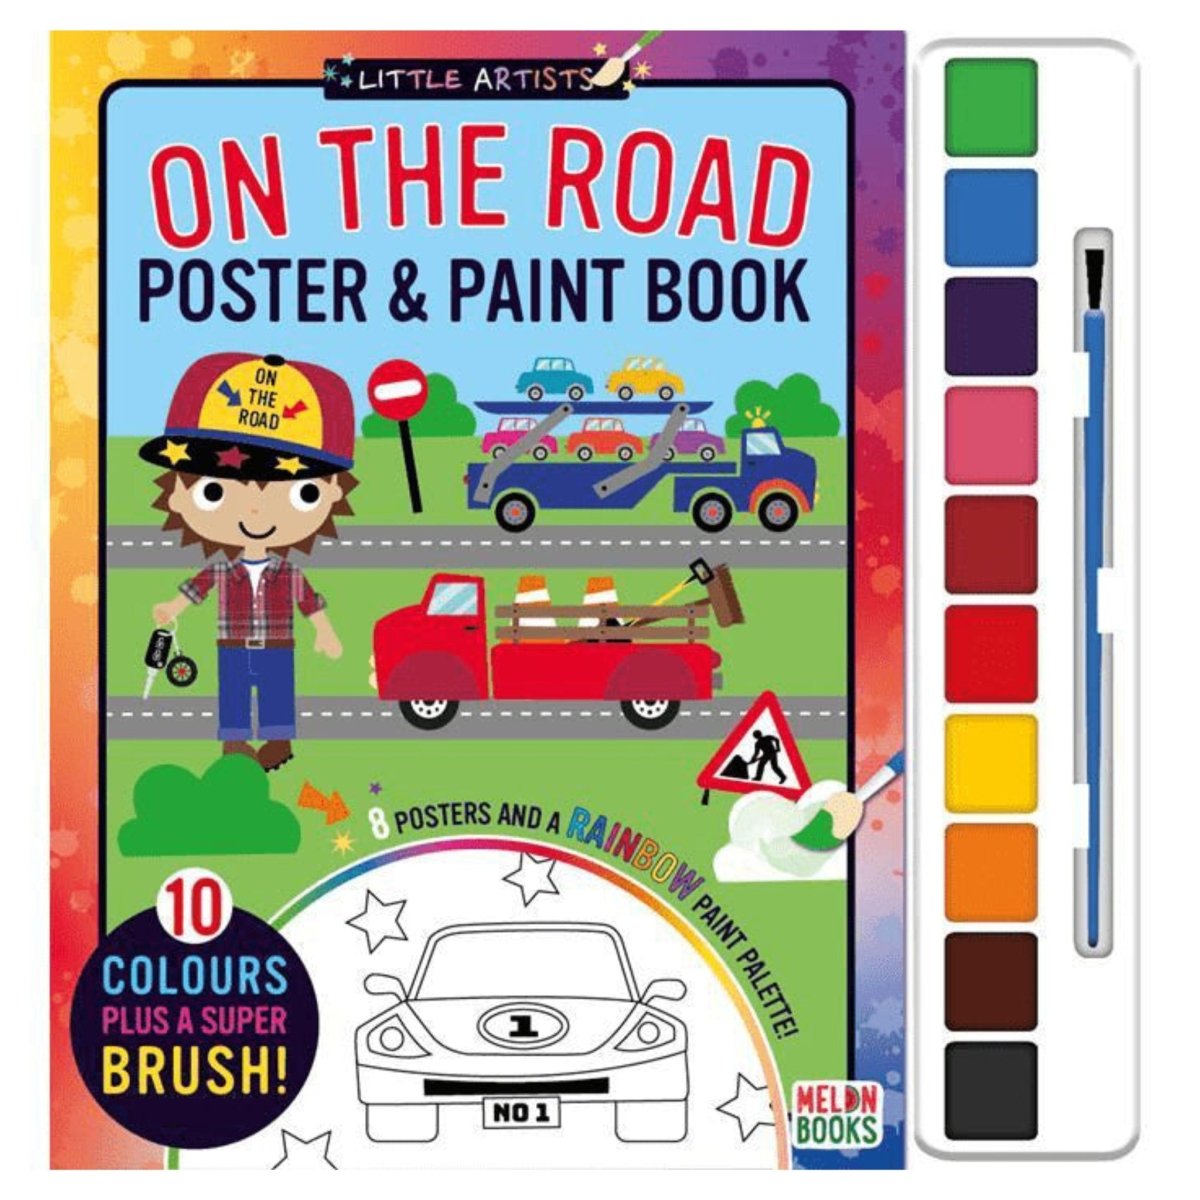 On The Road Poster & Paint Book - Kids Party Craft